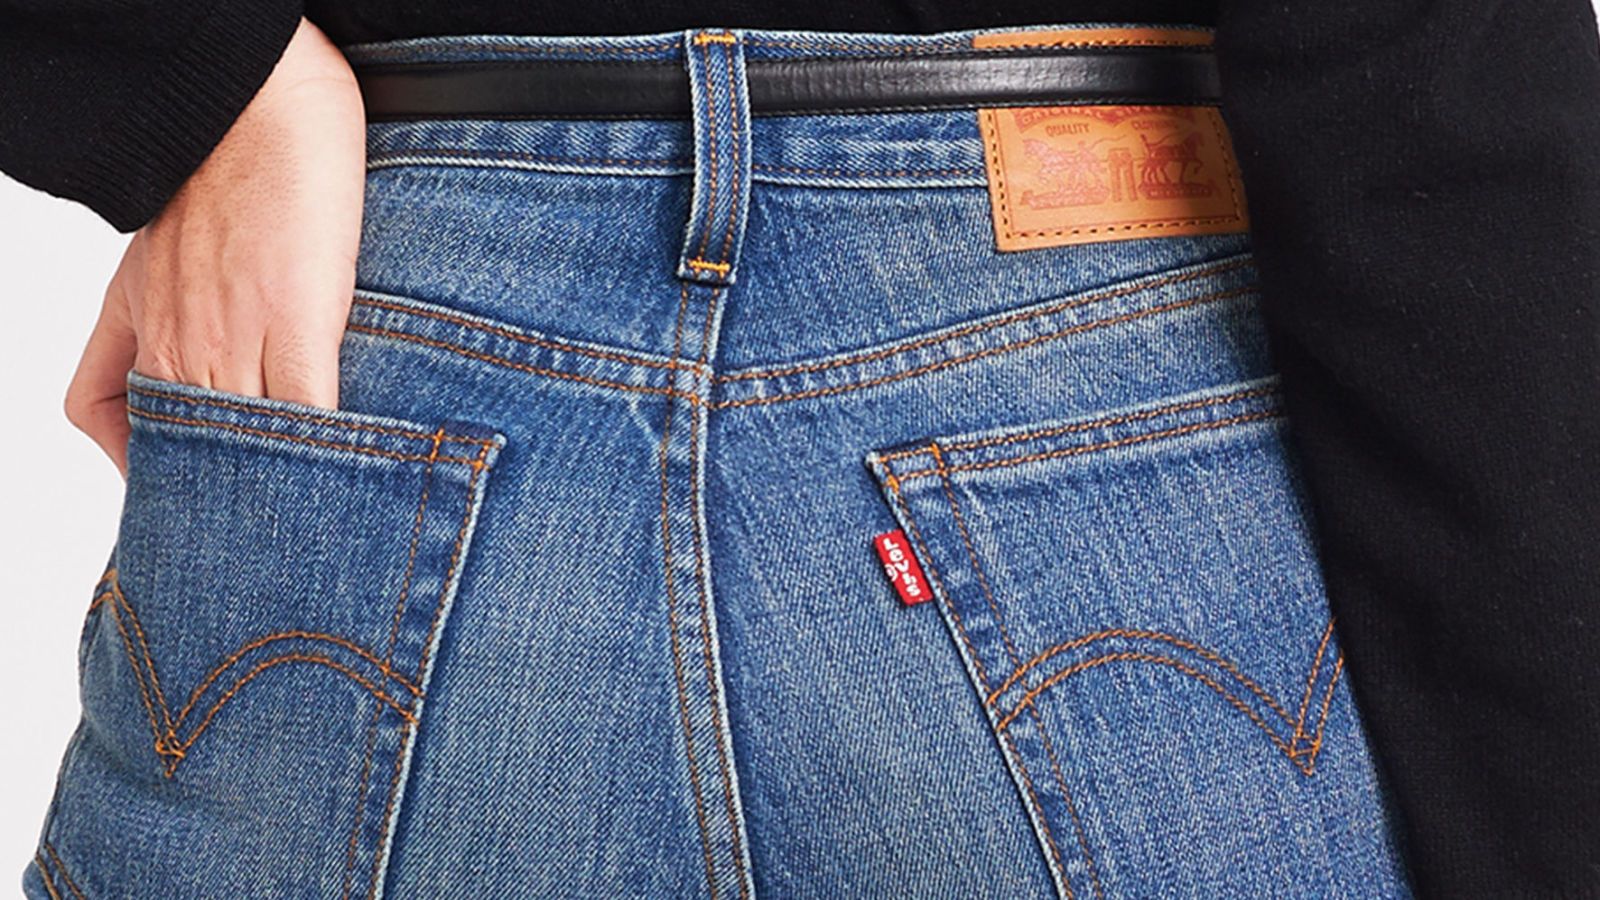 How to Wear Wedgie Jeans - Test Driving Levi's Wedgie Jeans | Marie Claire